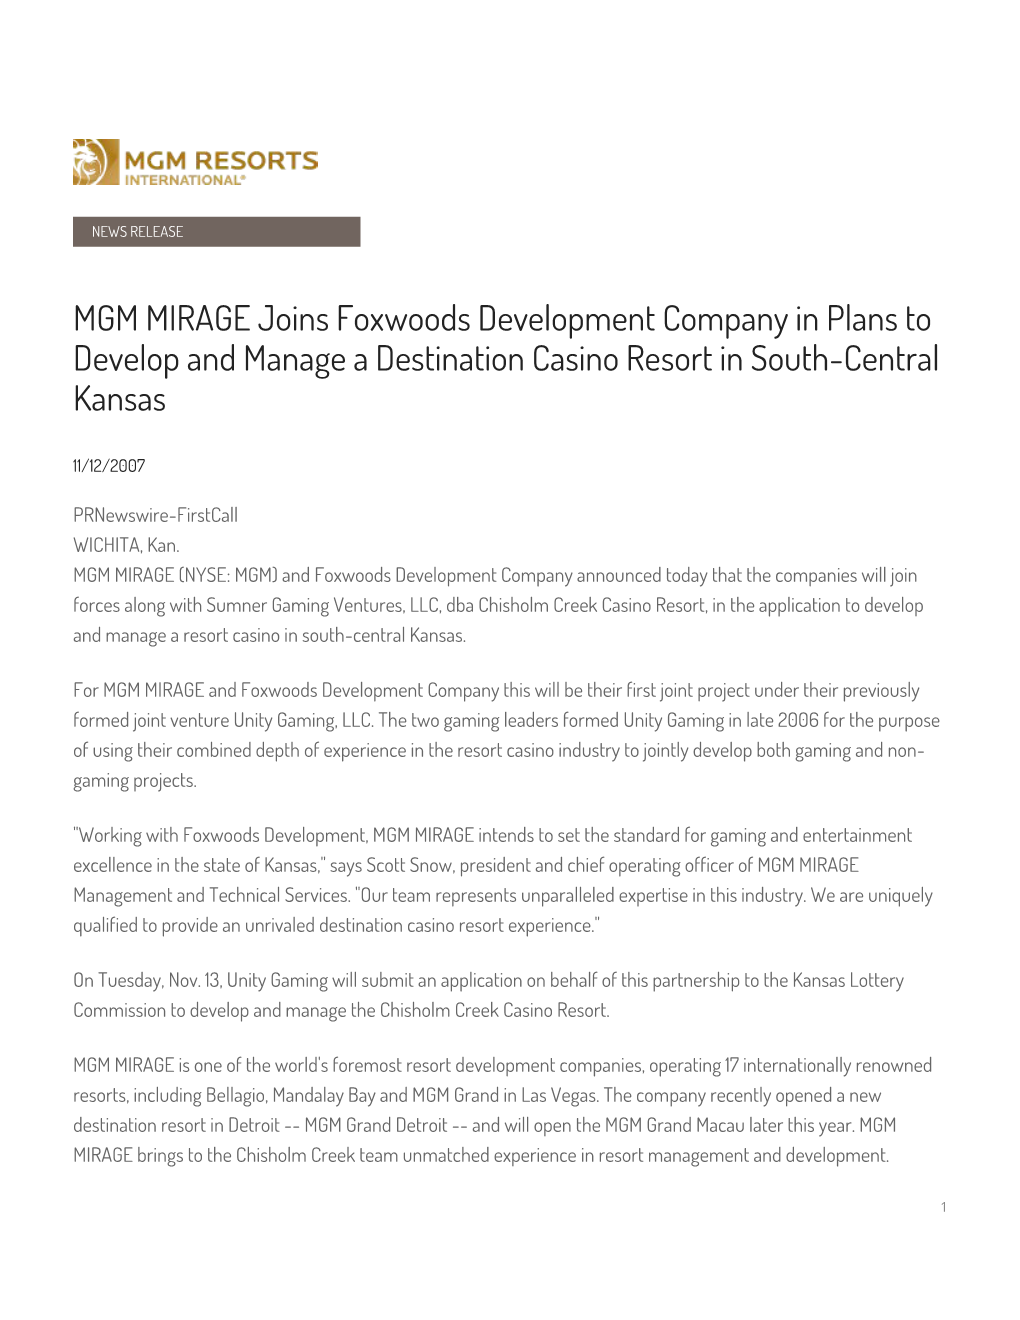 MGM MIRAGE Joins Foxwoods Development Company in Plans to Develop and Manage a Destination Casino Resort in South-Central Kansas